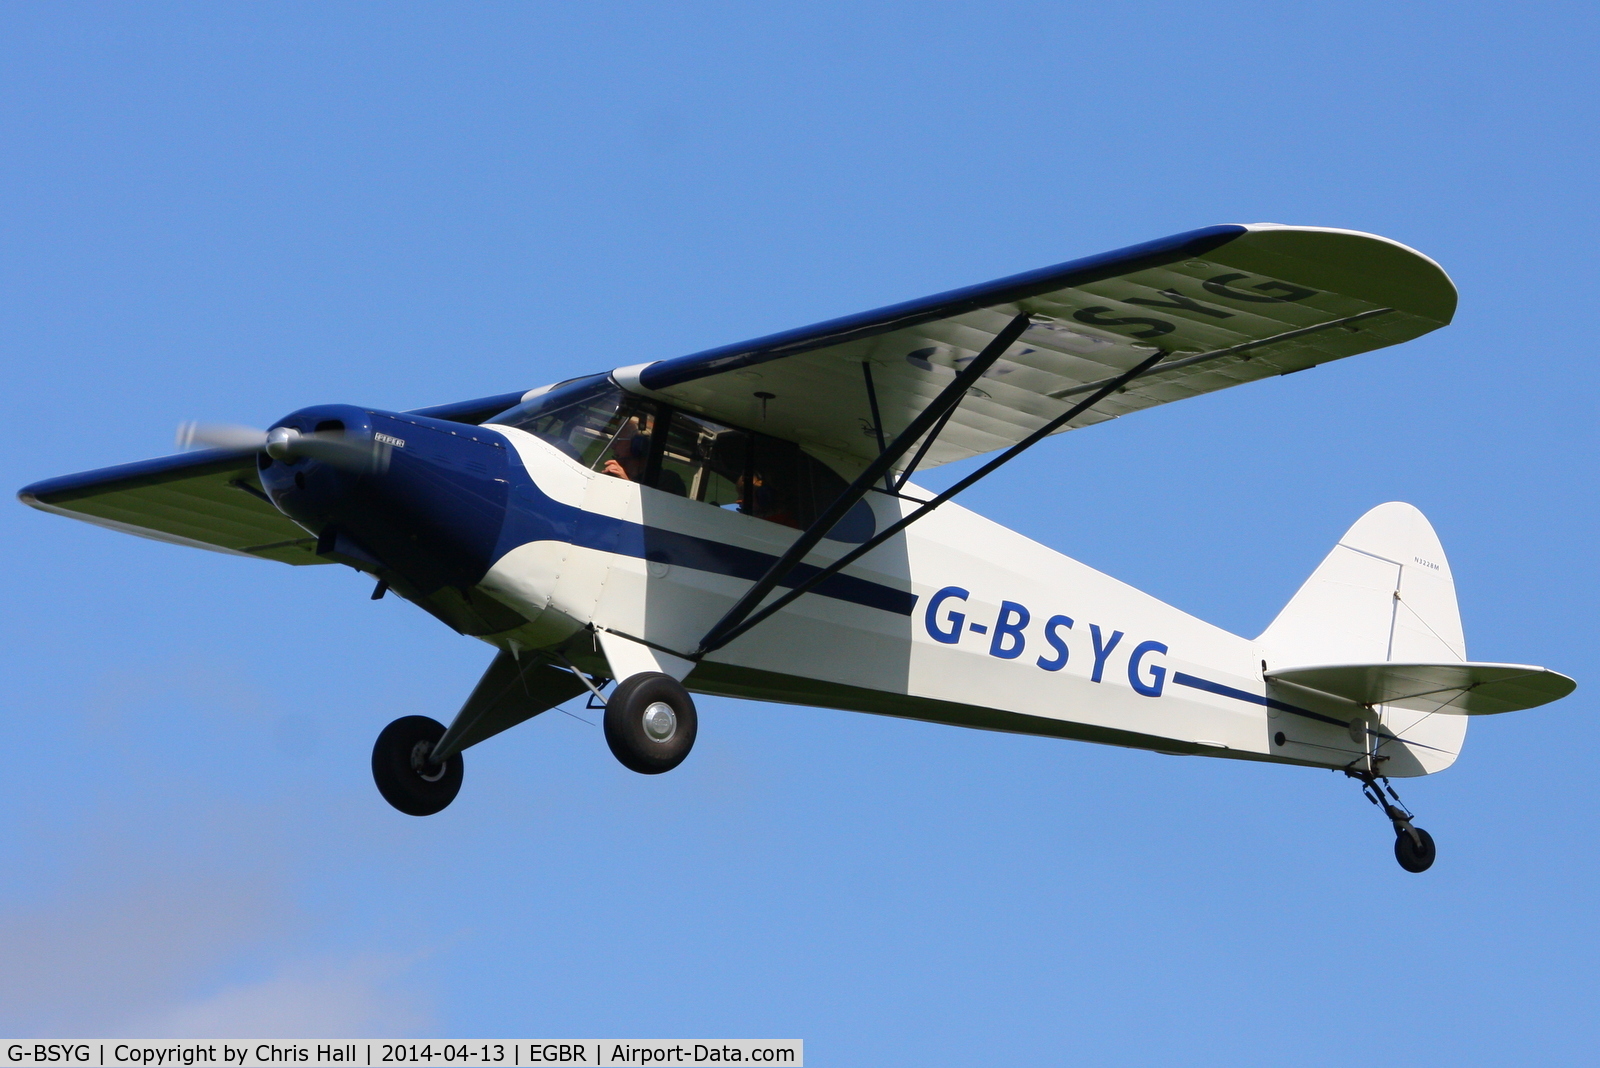 G-BSYG, 1947 Piper PA-12 Super Cruiser C/N 12-2106, at Breighton's 'Early Bird' Fly-in 13/04/14